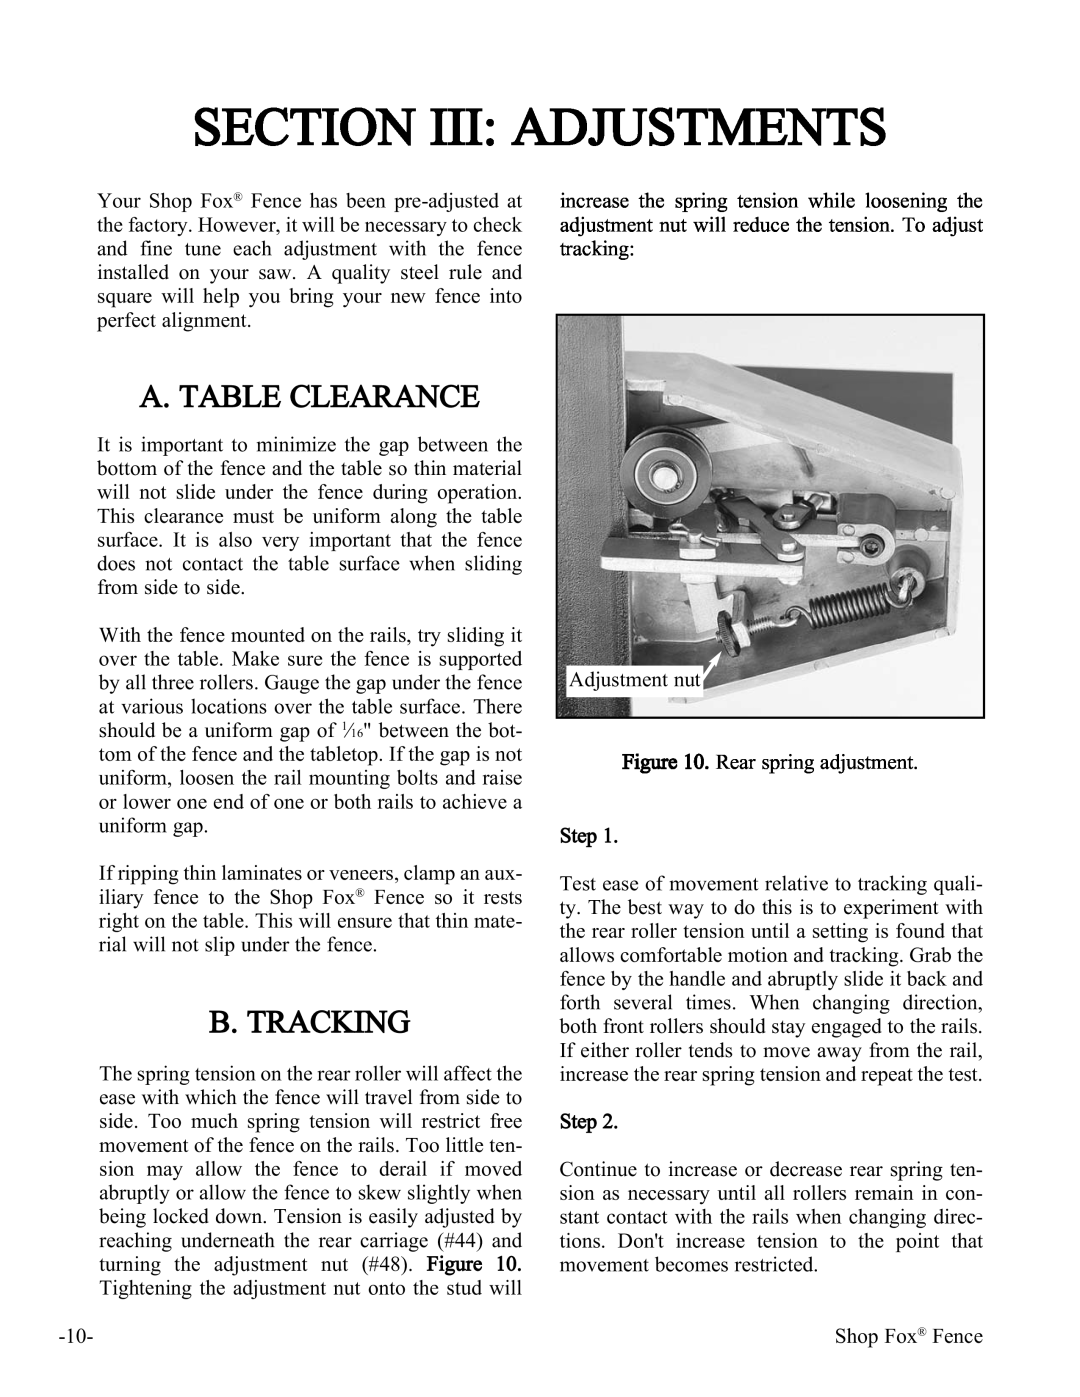 Woodstock W1410 manual Section Iii Adjustments, A. Table Clearance, B. Tracking 